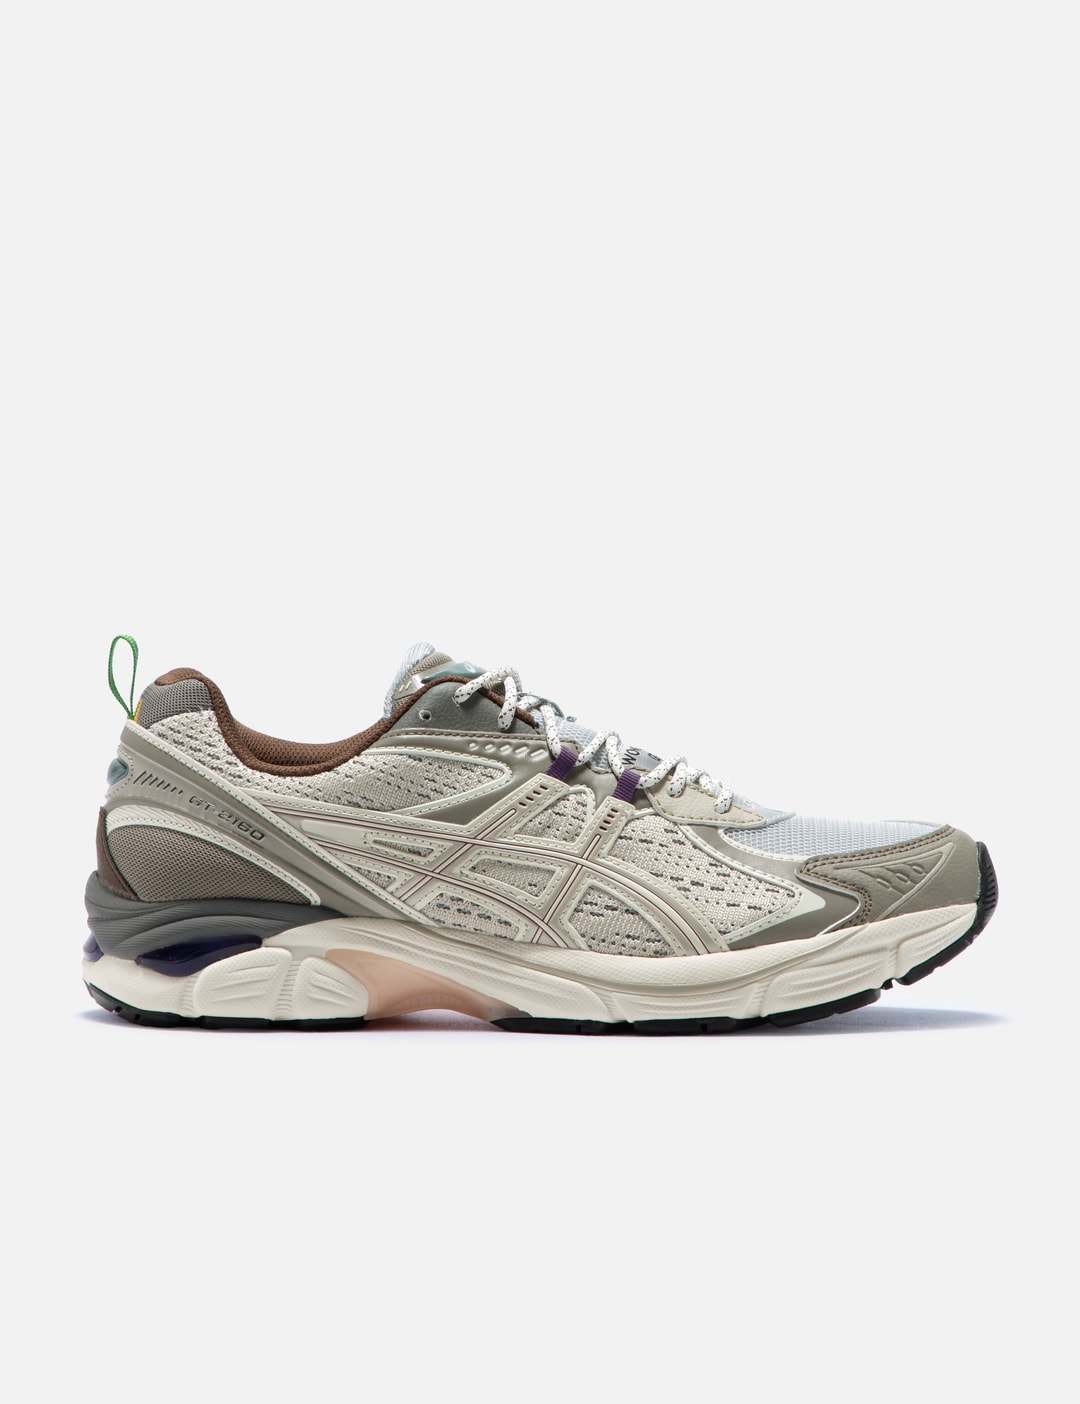 Asics - WOOD WOOD X GT-2160 | HBX - Globally Curated Fashion and ...